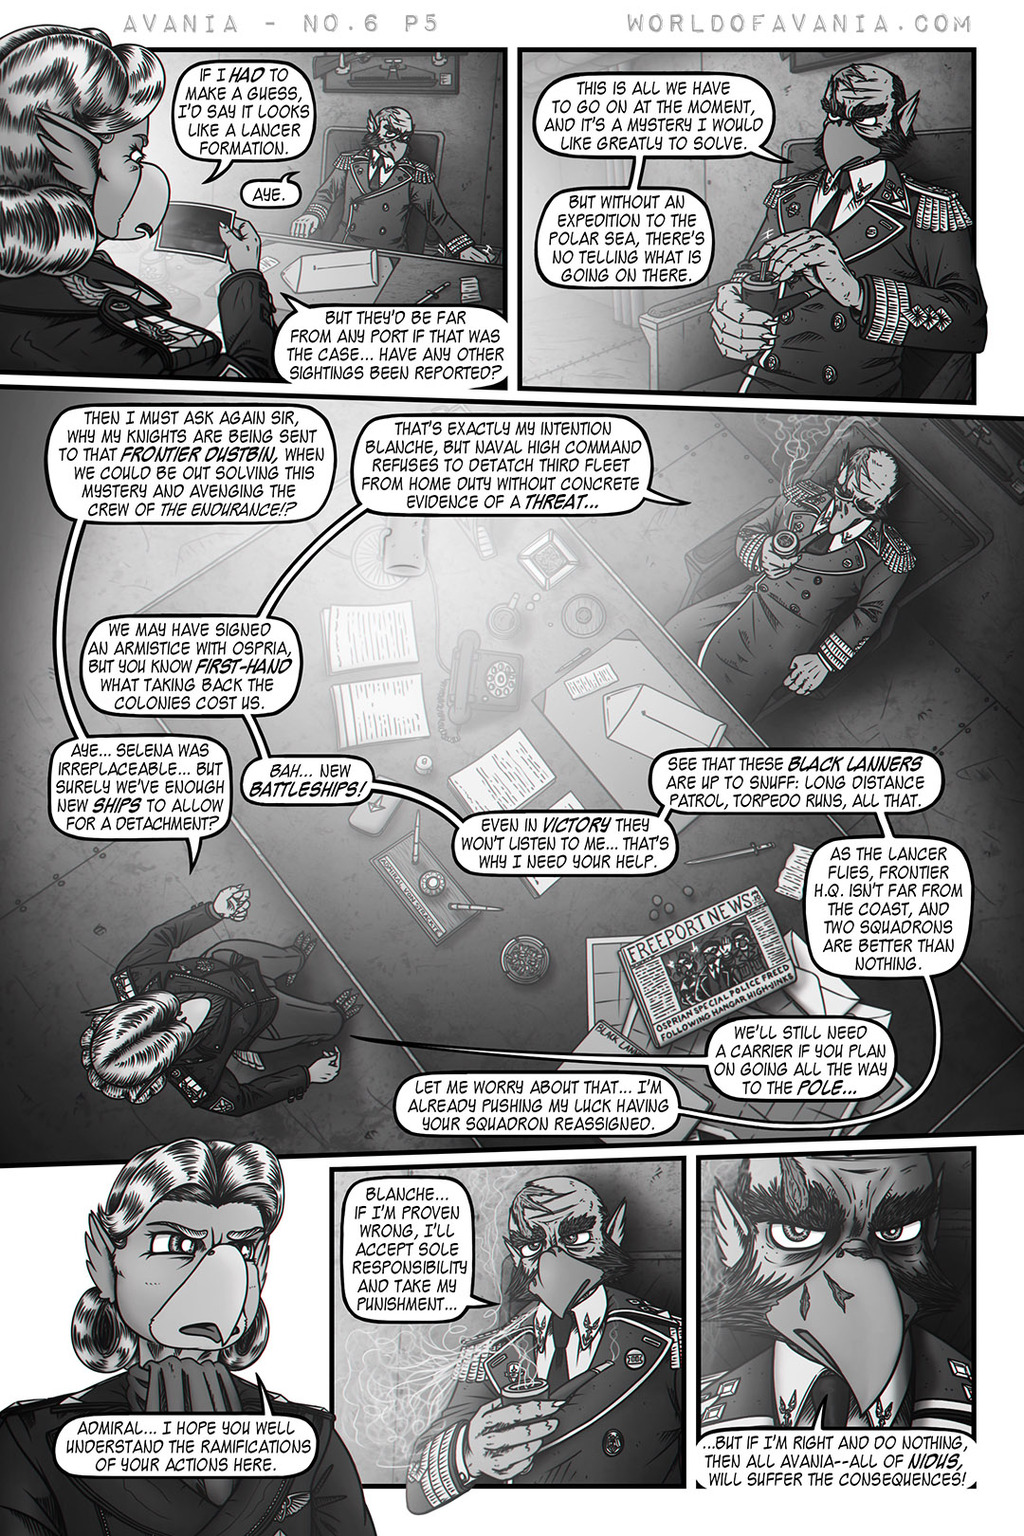 Avania Comic - Issue No.6, Page 5